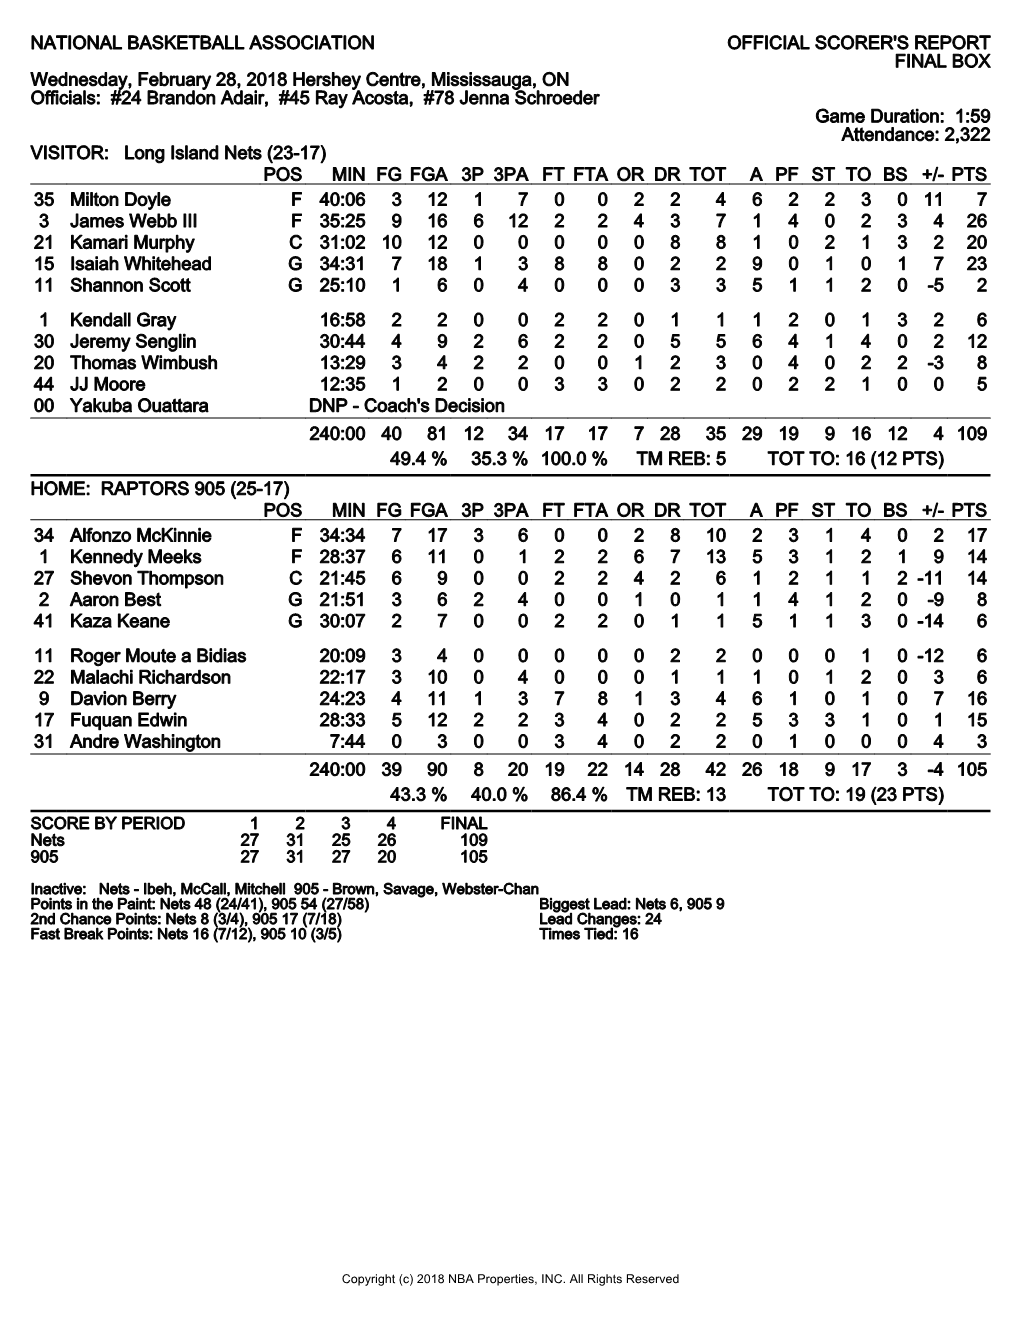 NATIONAL BASKETBALL ASSOCIATION OFFICIAL SCORER's REPORT FINAL BOX Wednesday, February 28, 2018 Hershey Centre, Mississauga, ON